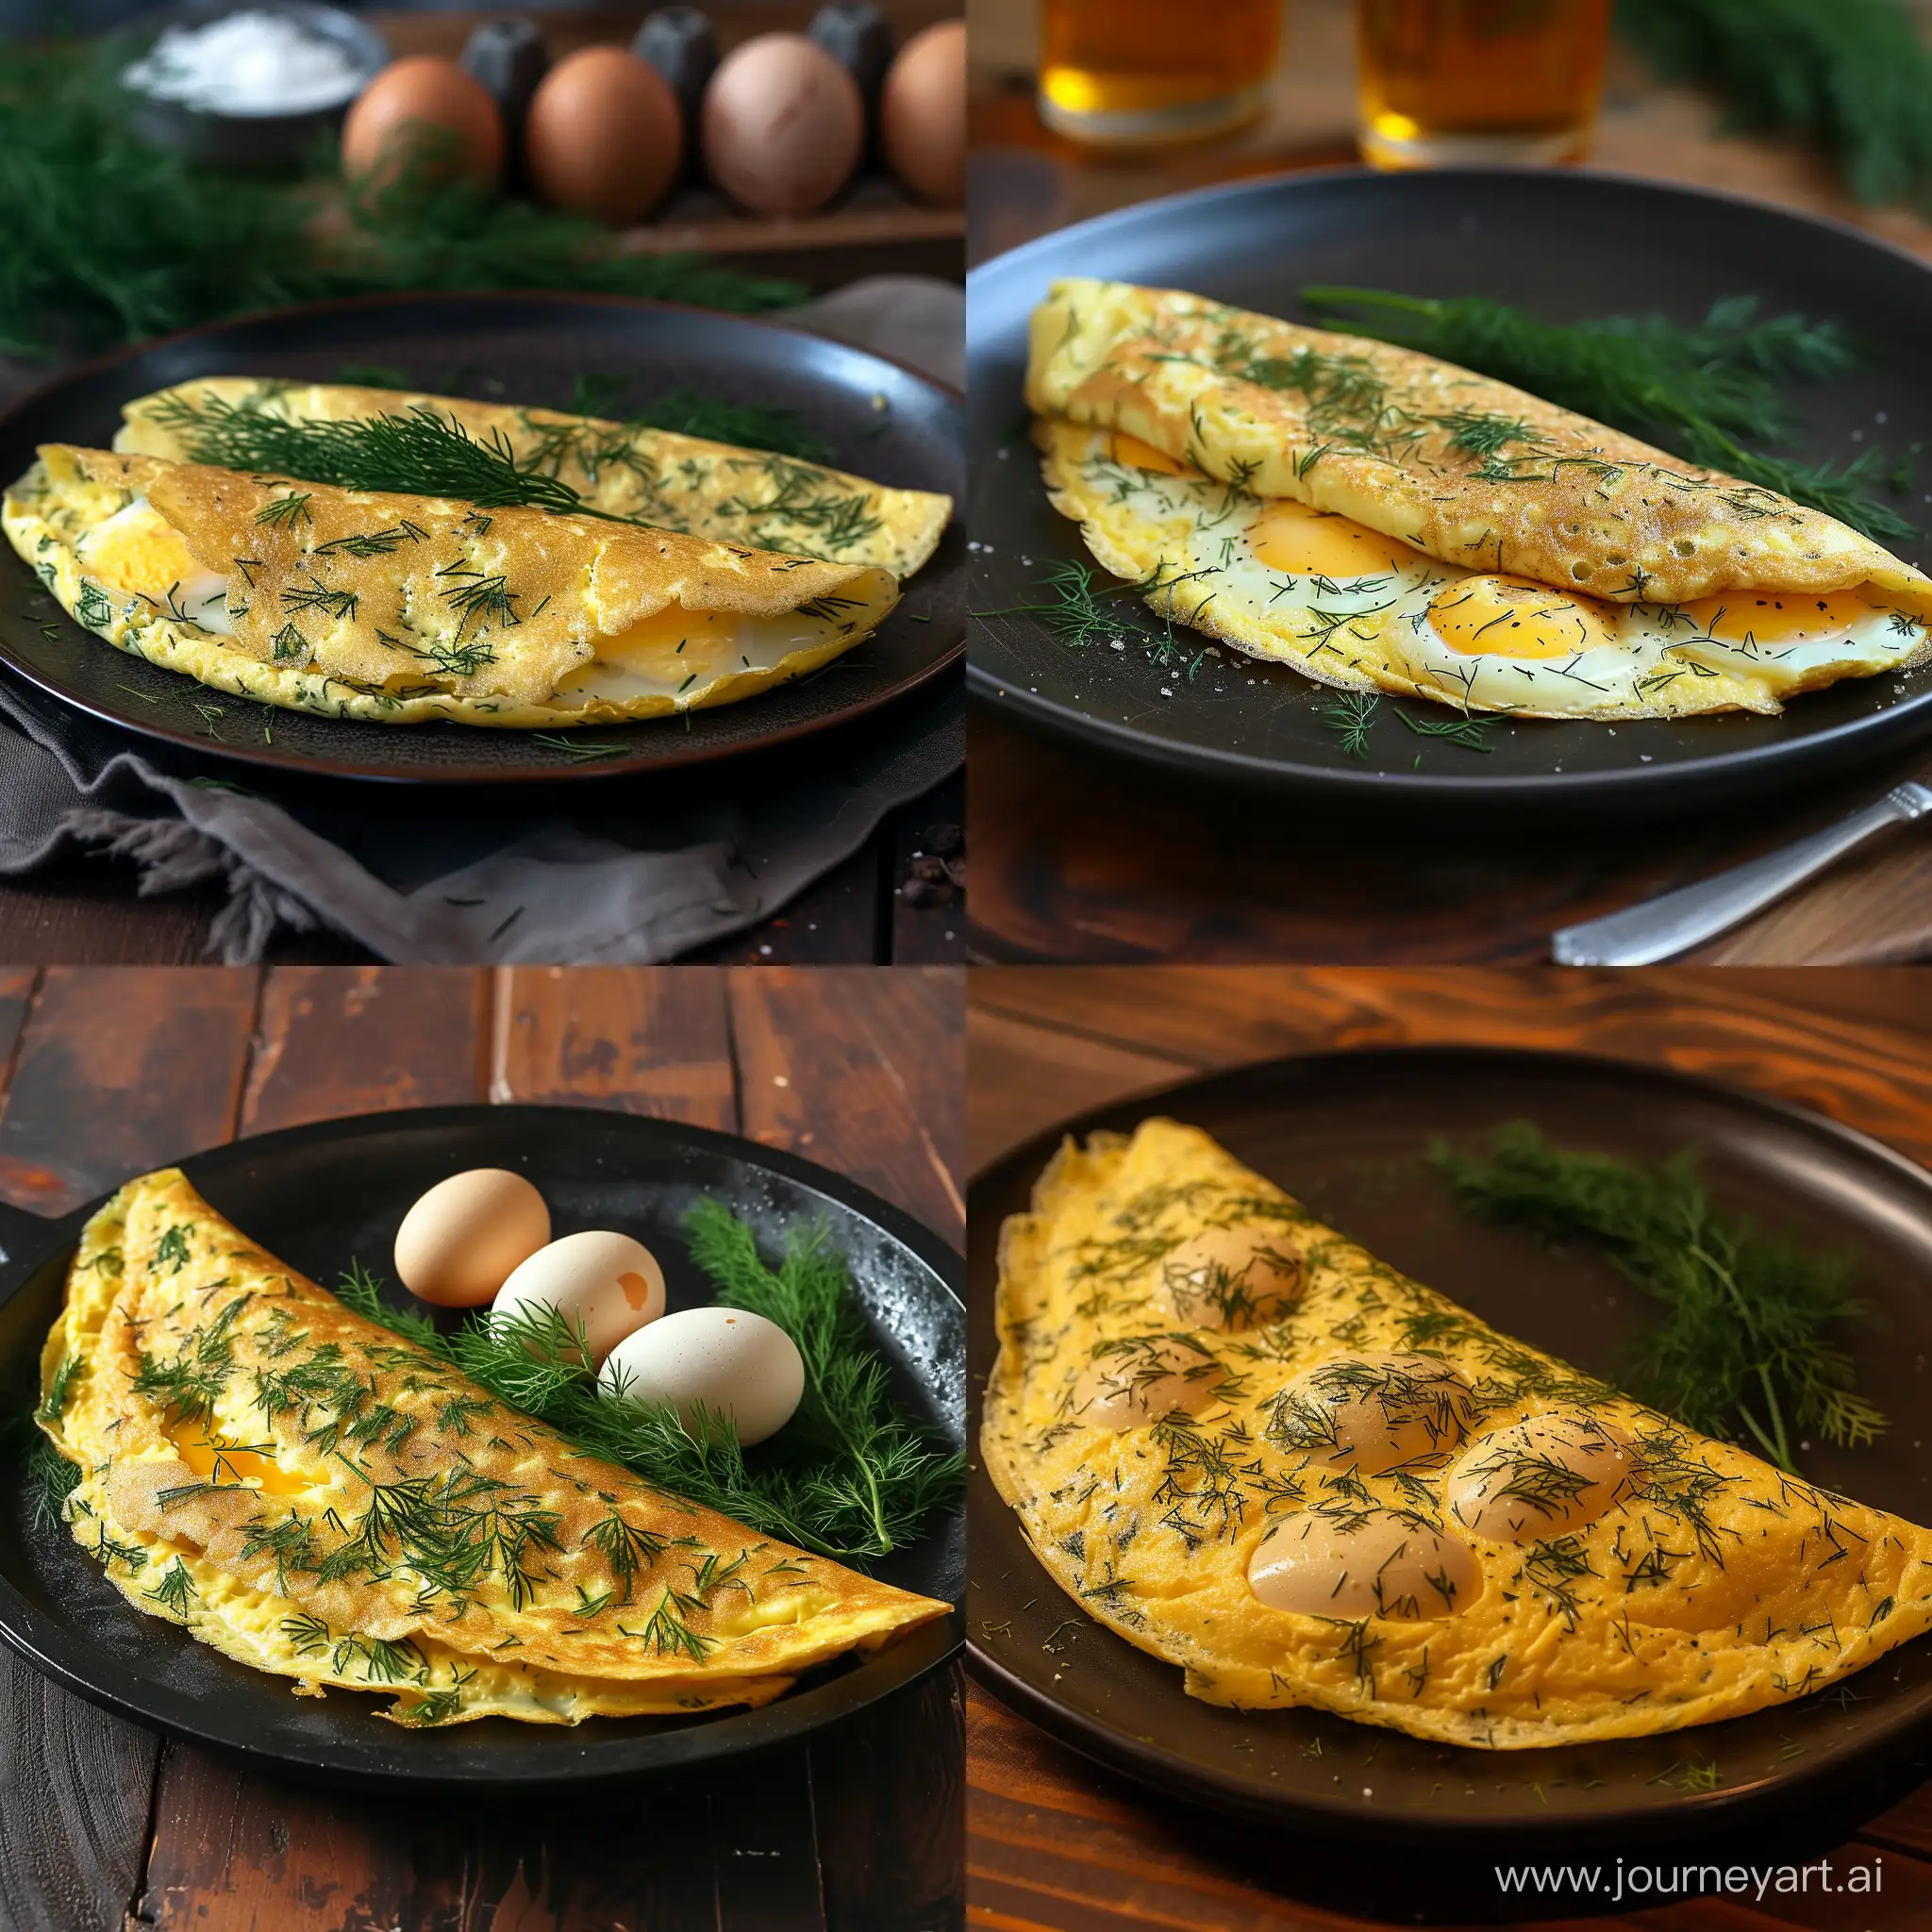 Savory-Omelette-Delight-with-Three-Eggs-and-Fresh-Dill-on-Elegant-Dark-Plate